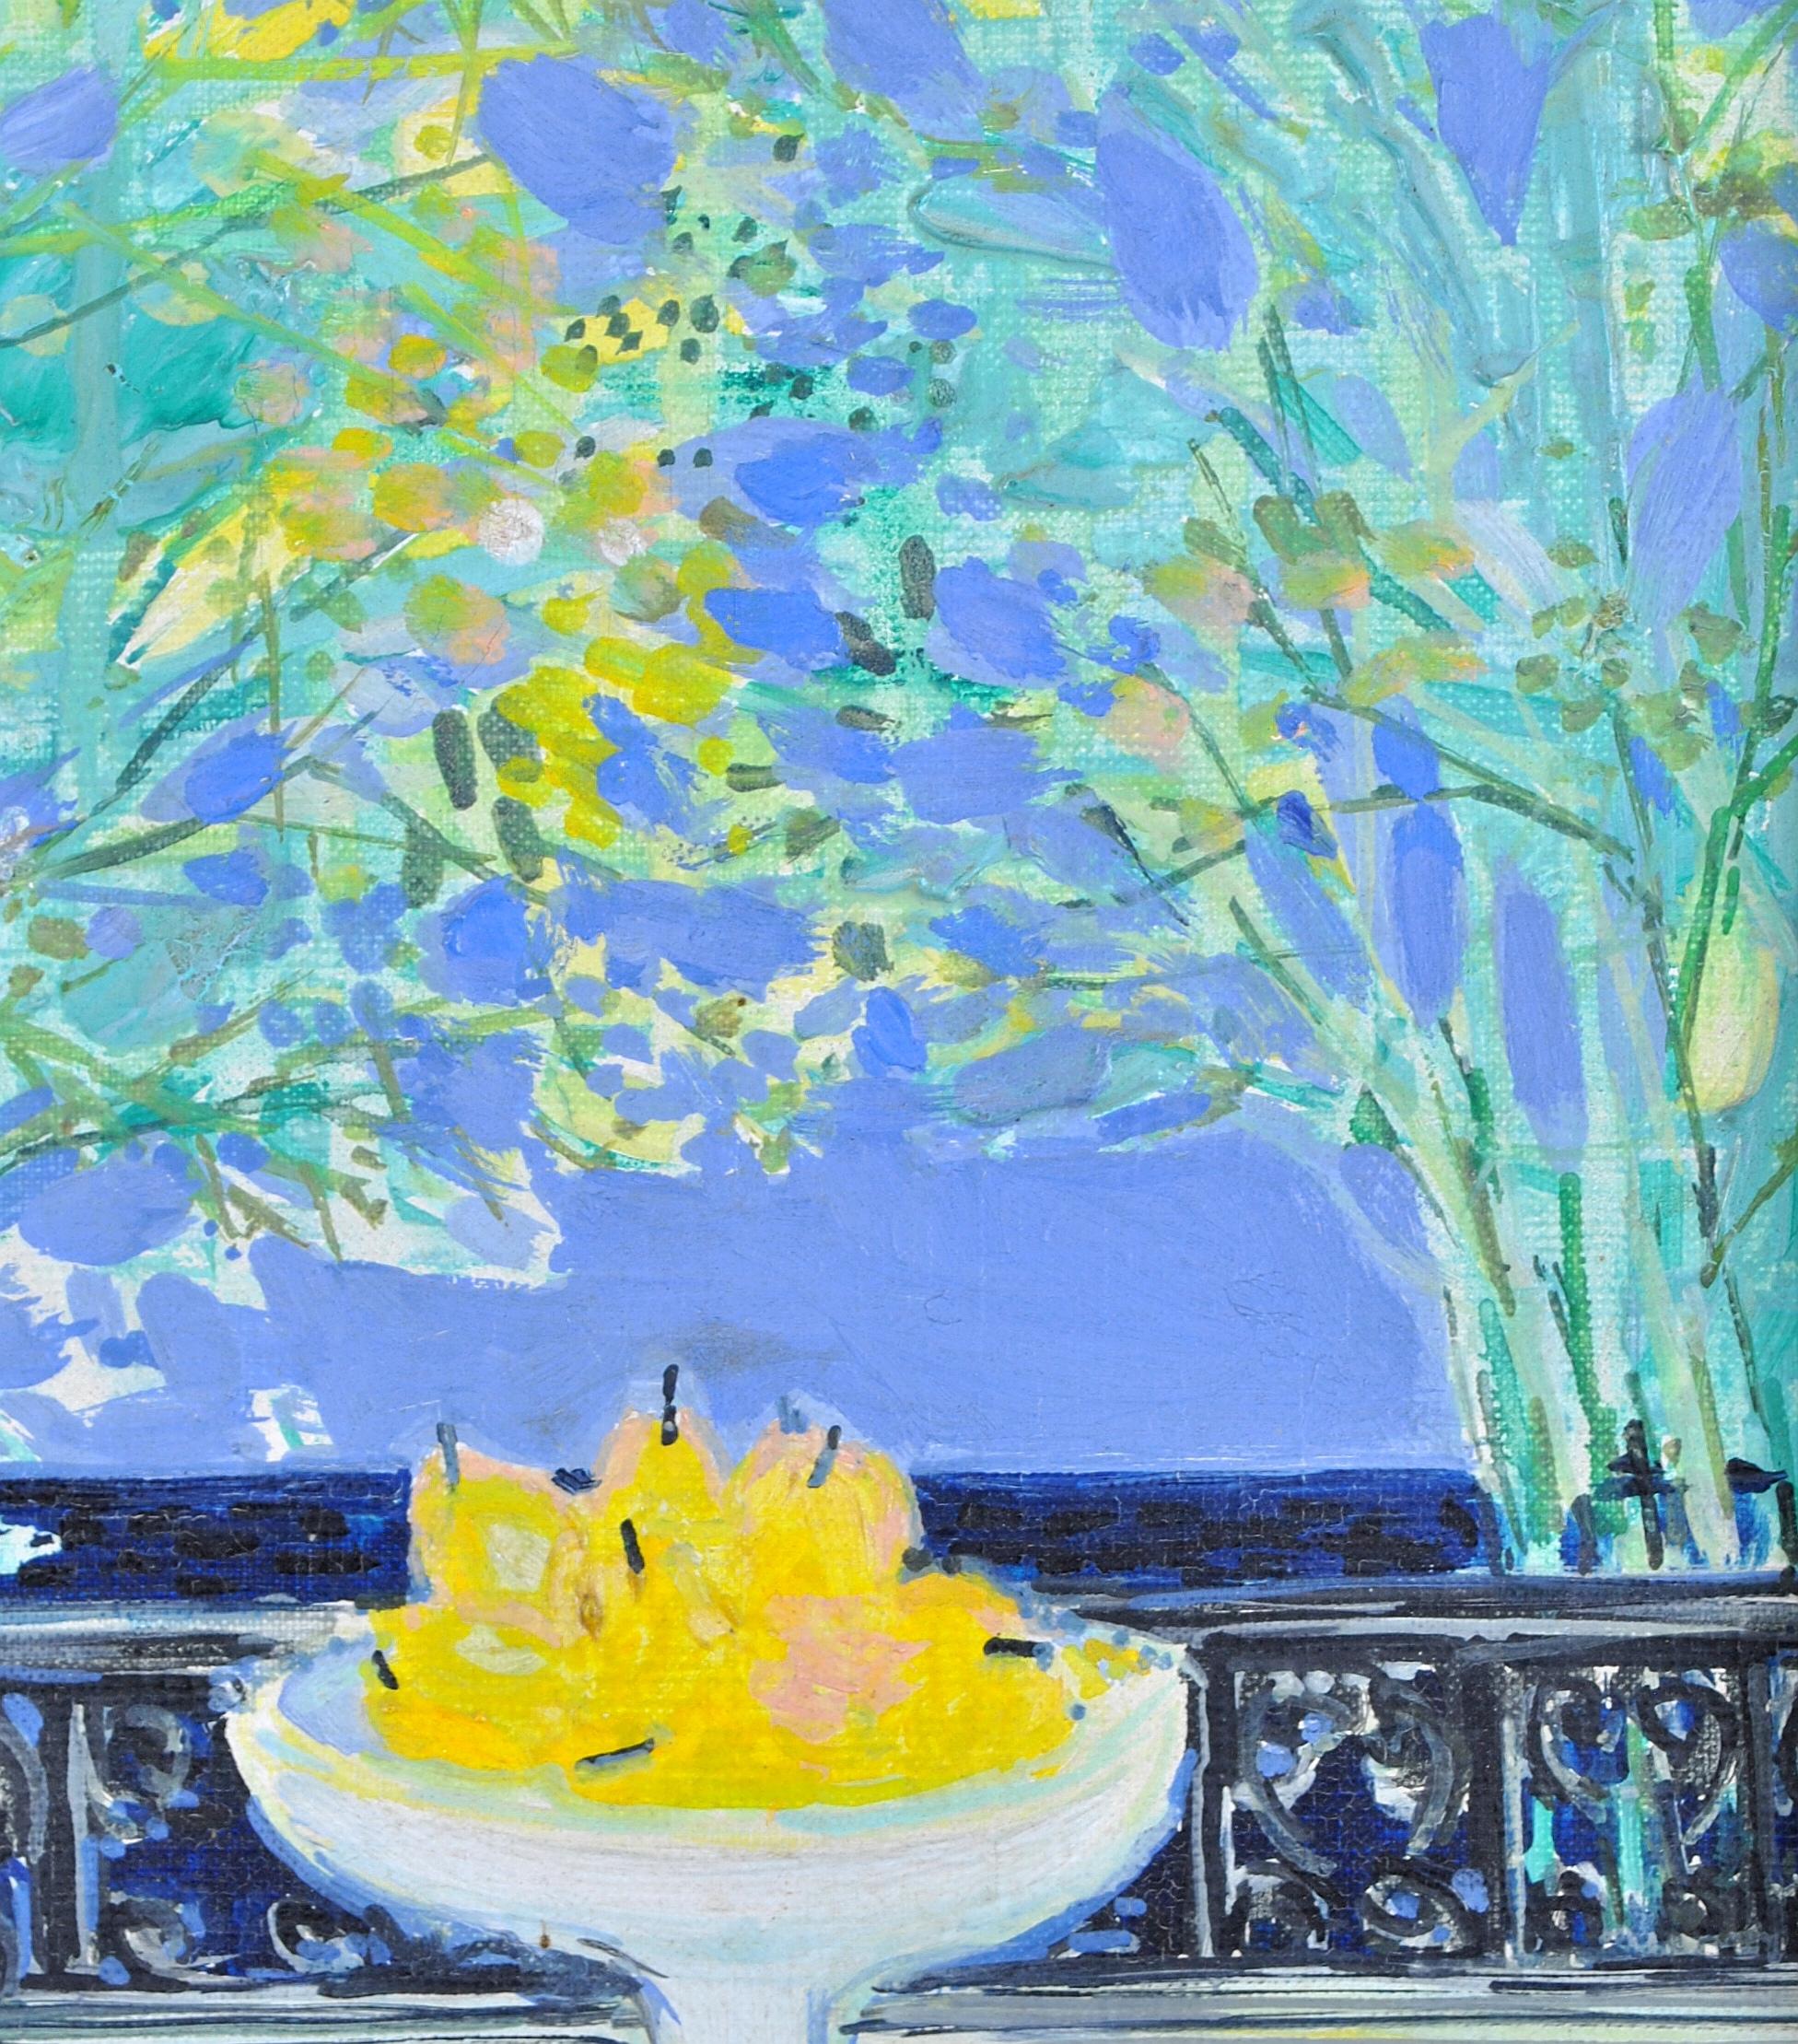 Pears on a Balcony - French Impressionist Still Life Oil on Canvas Painting 2